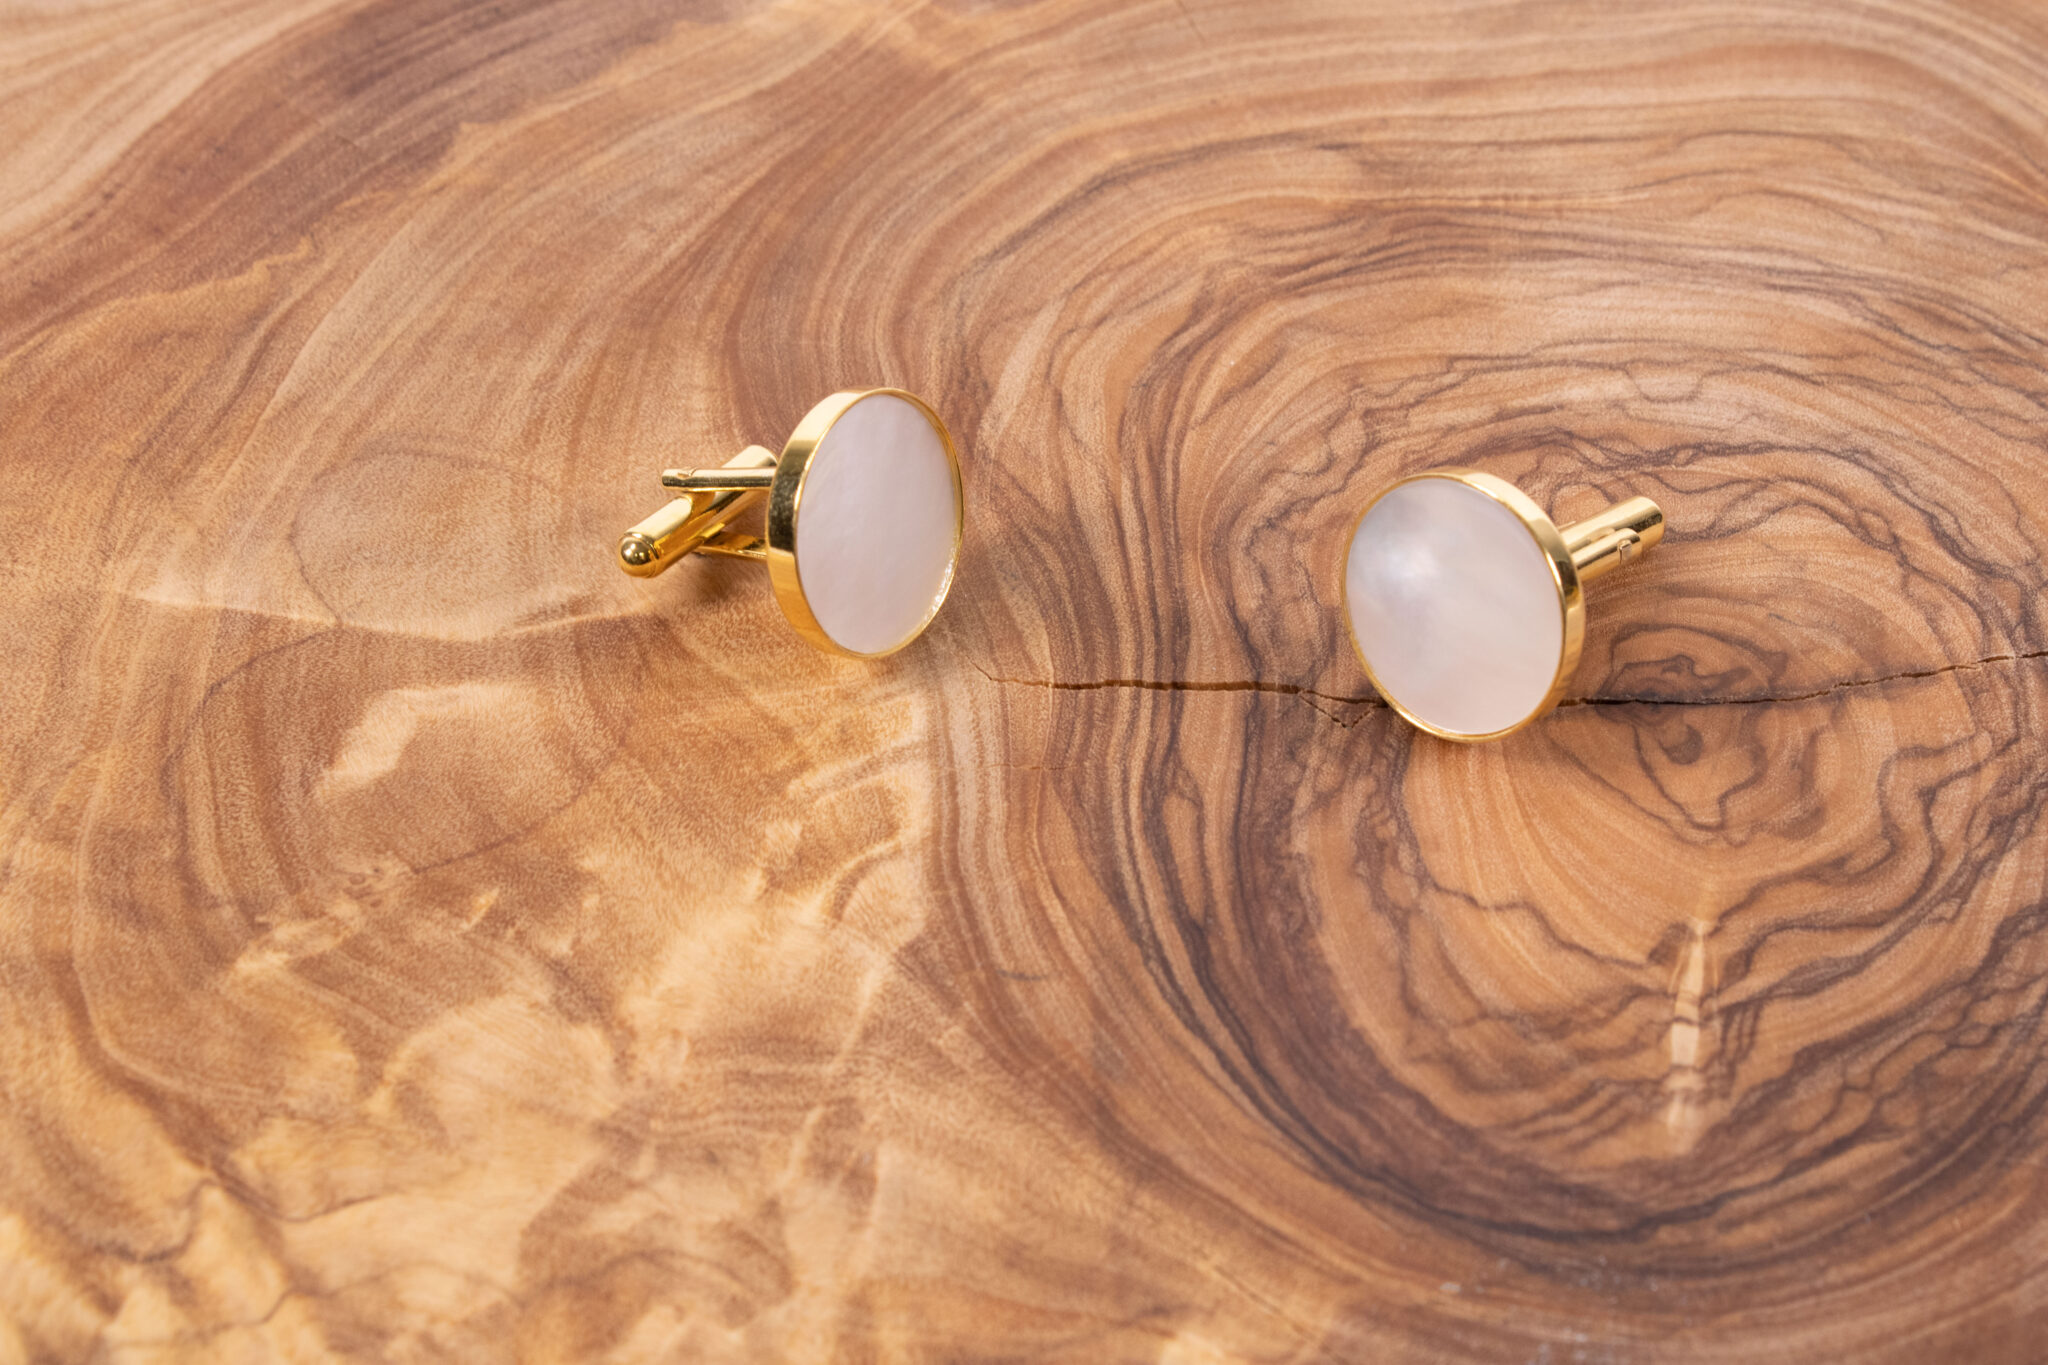 Product image of FredFloris Mother of pearls shirt cufflinks